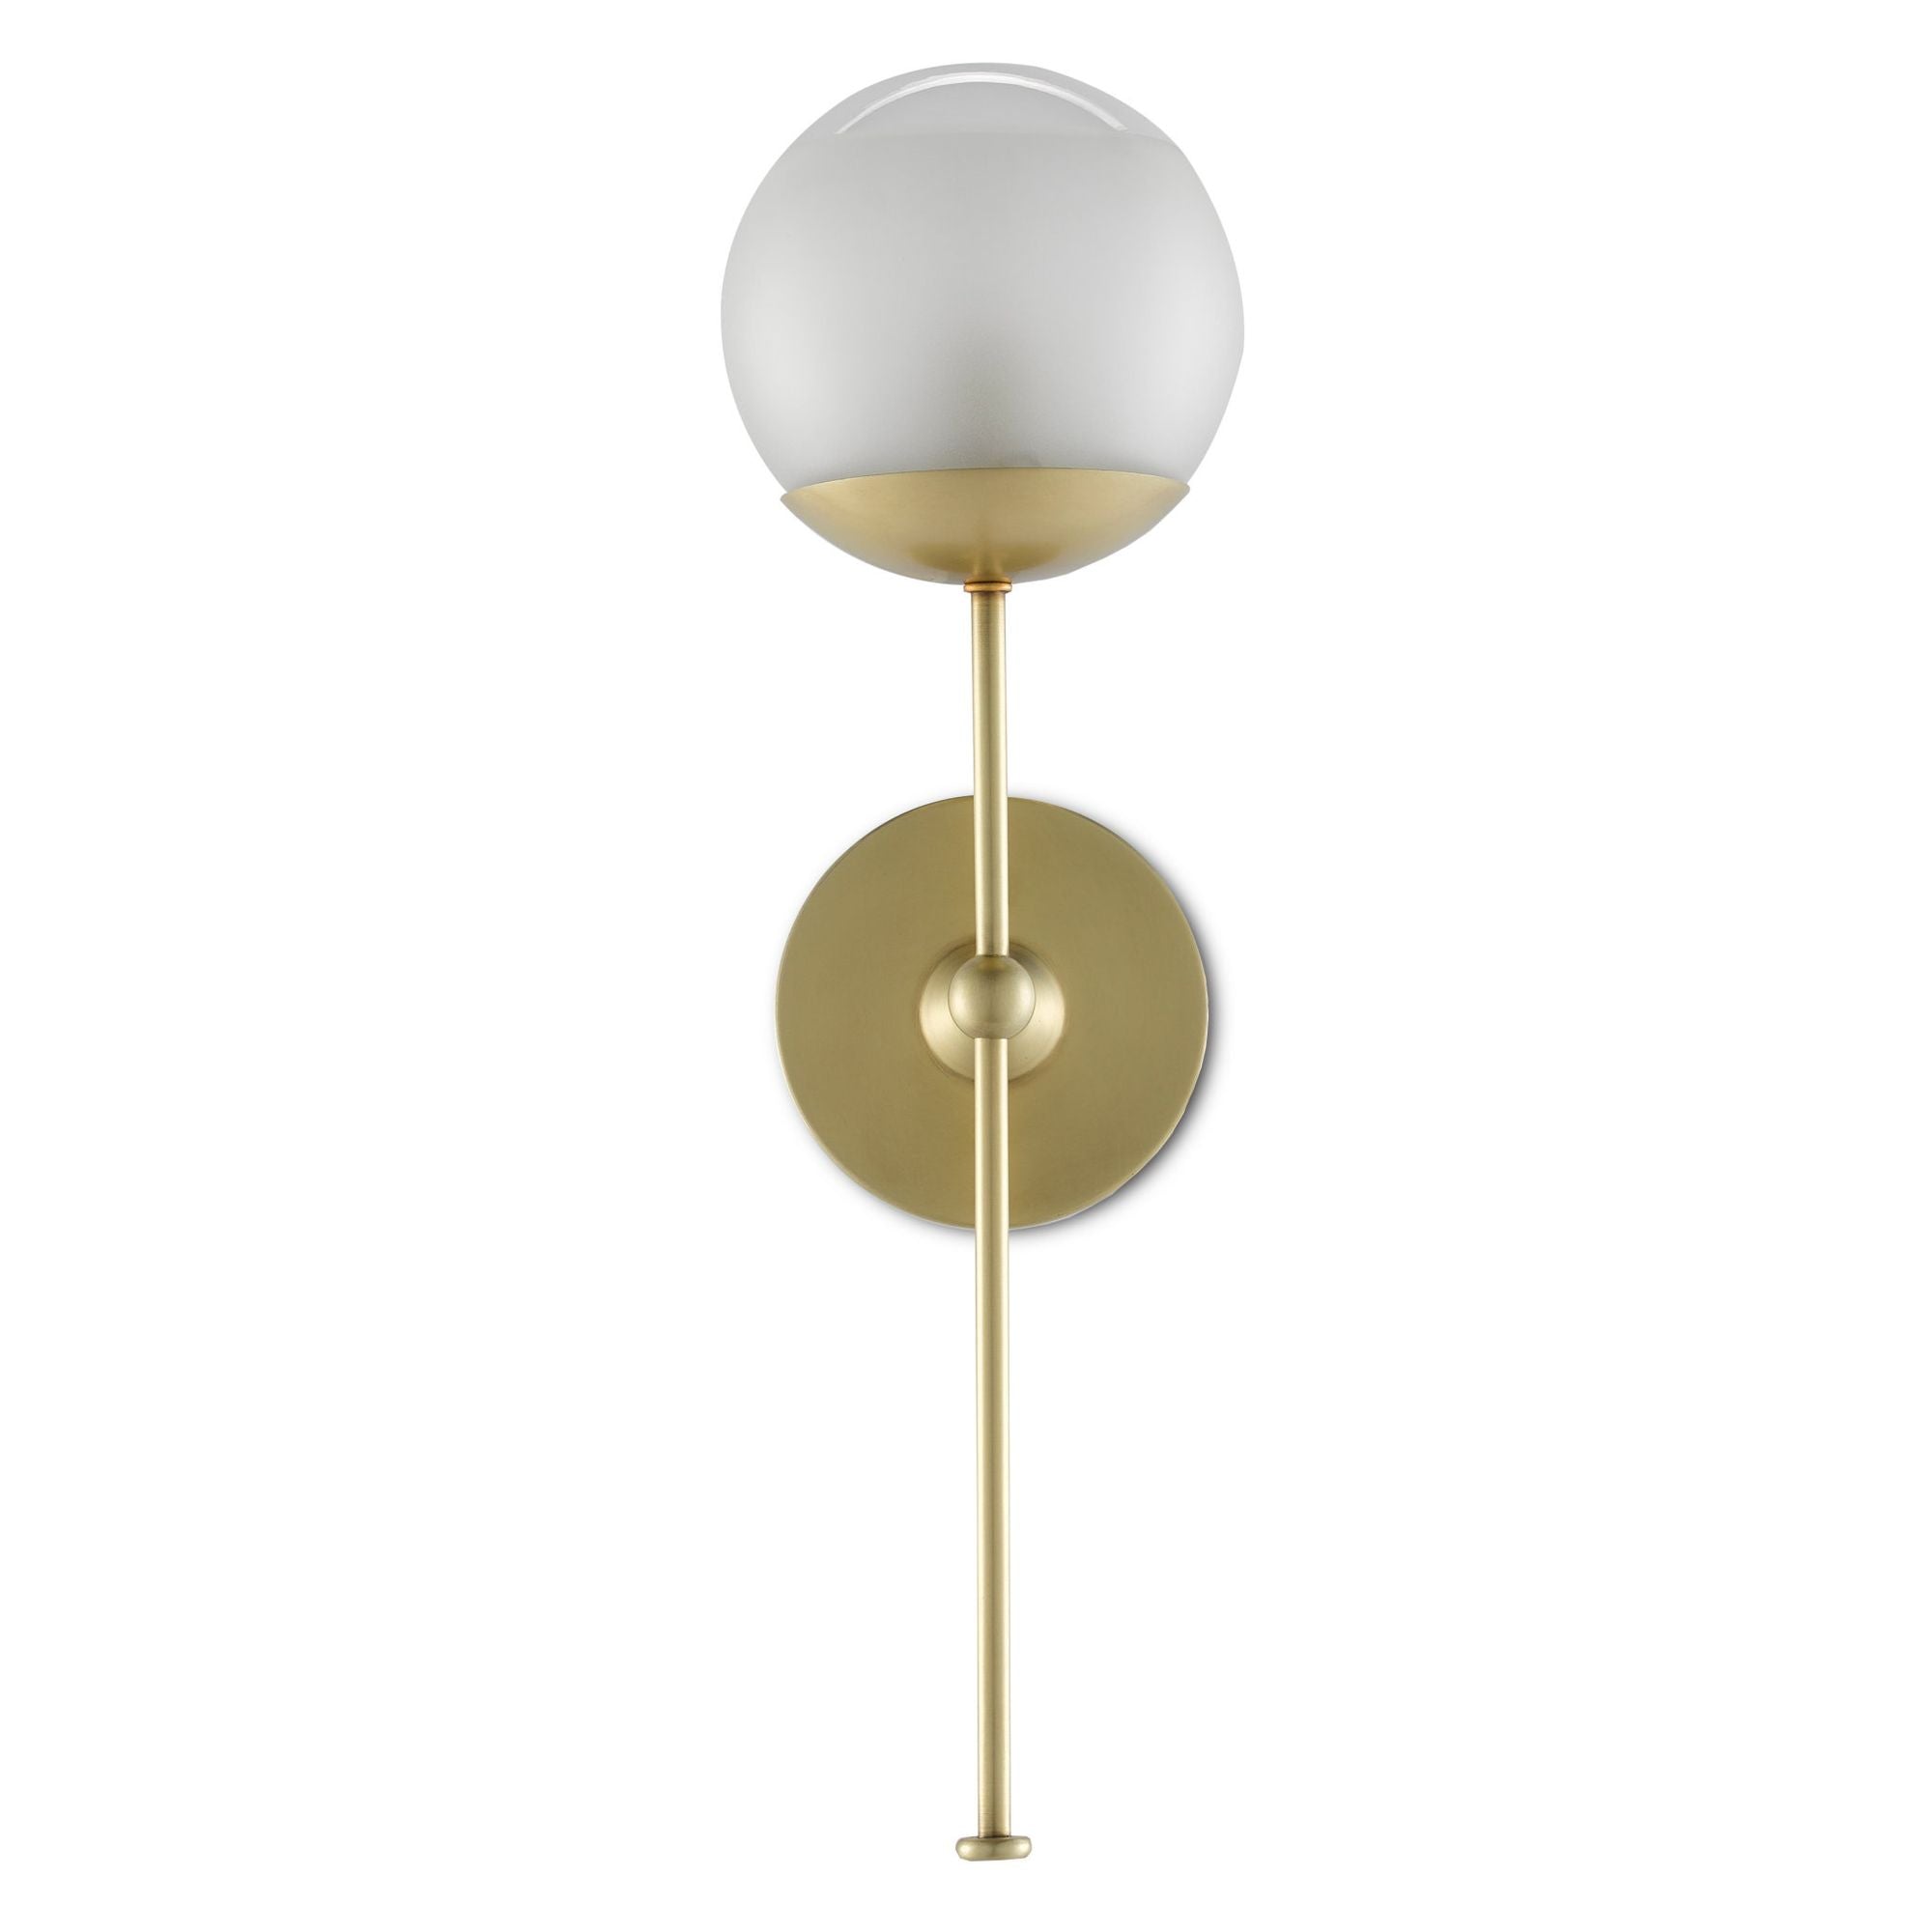 Montview Brass Wall Sconce - Brushed Brass